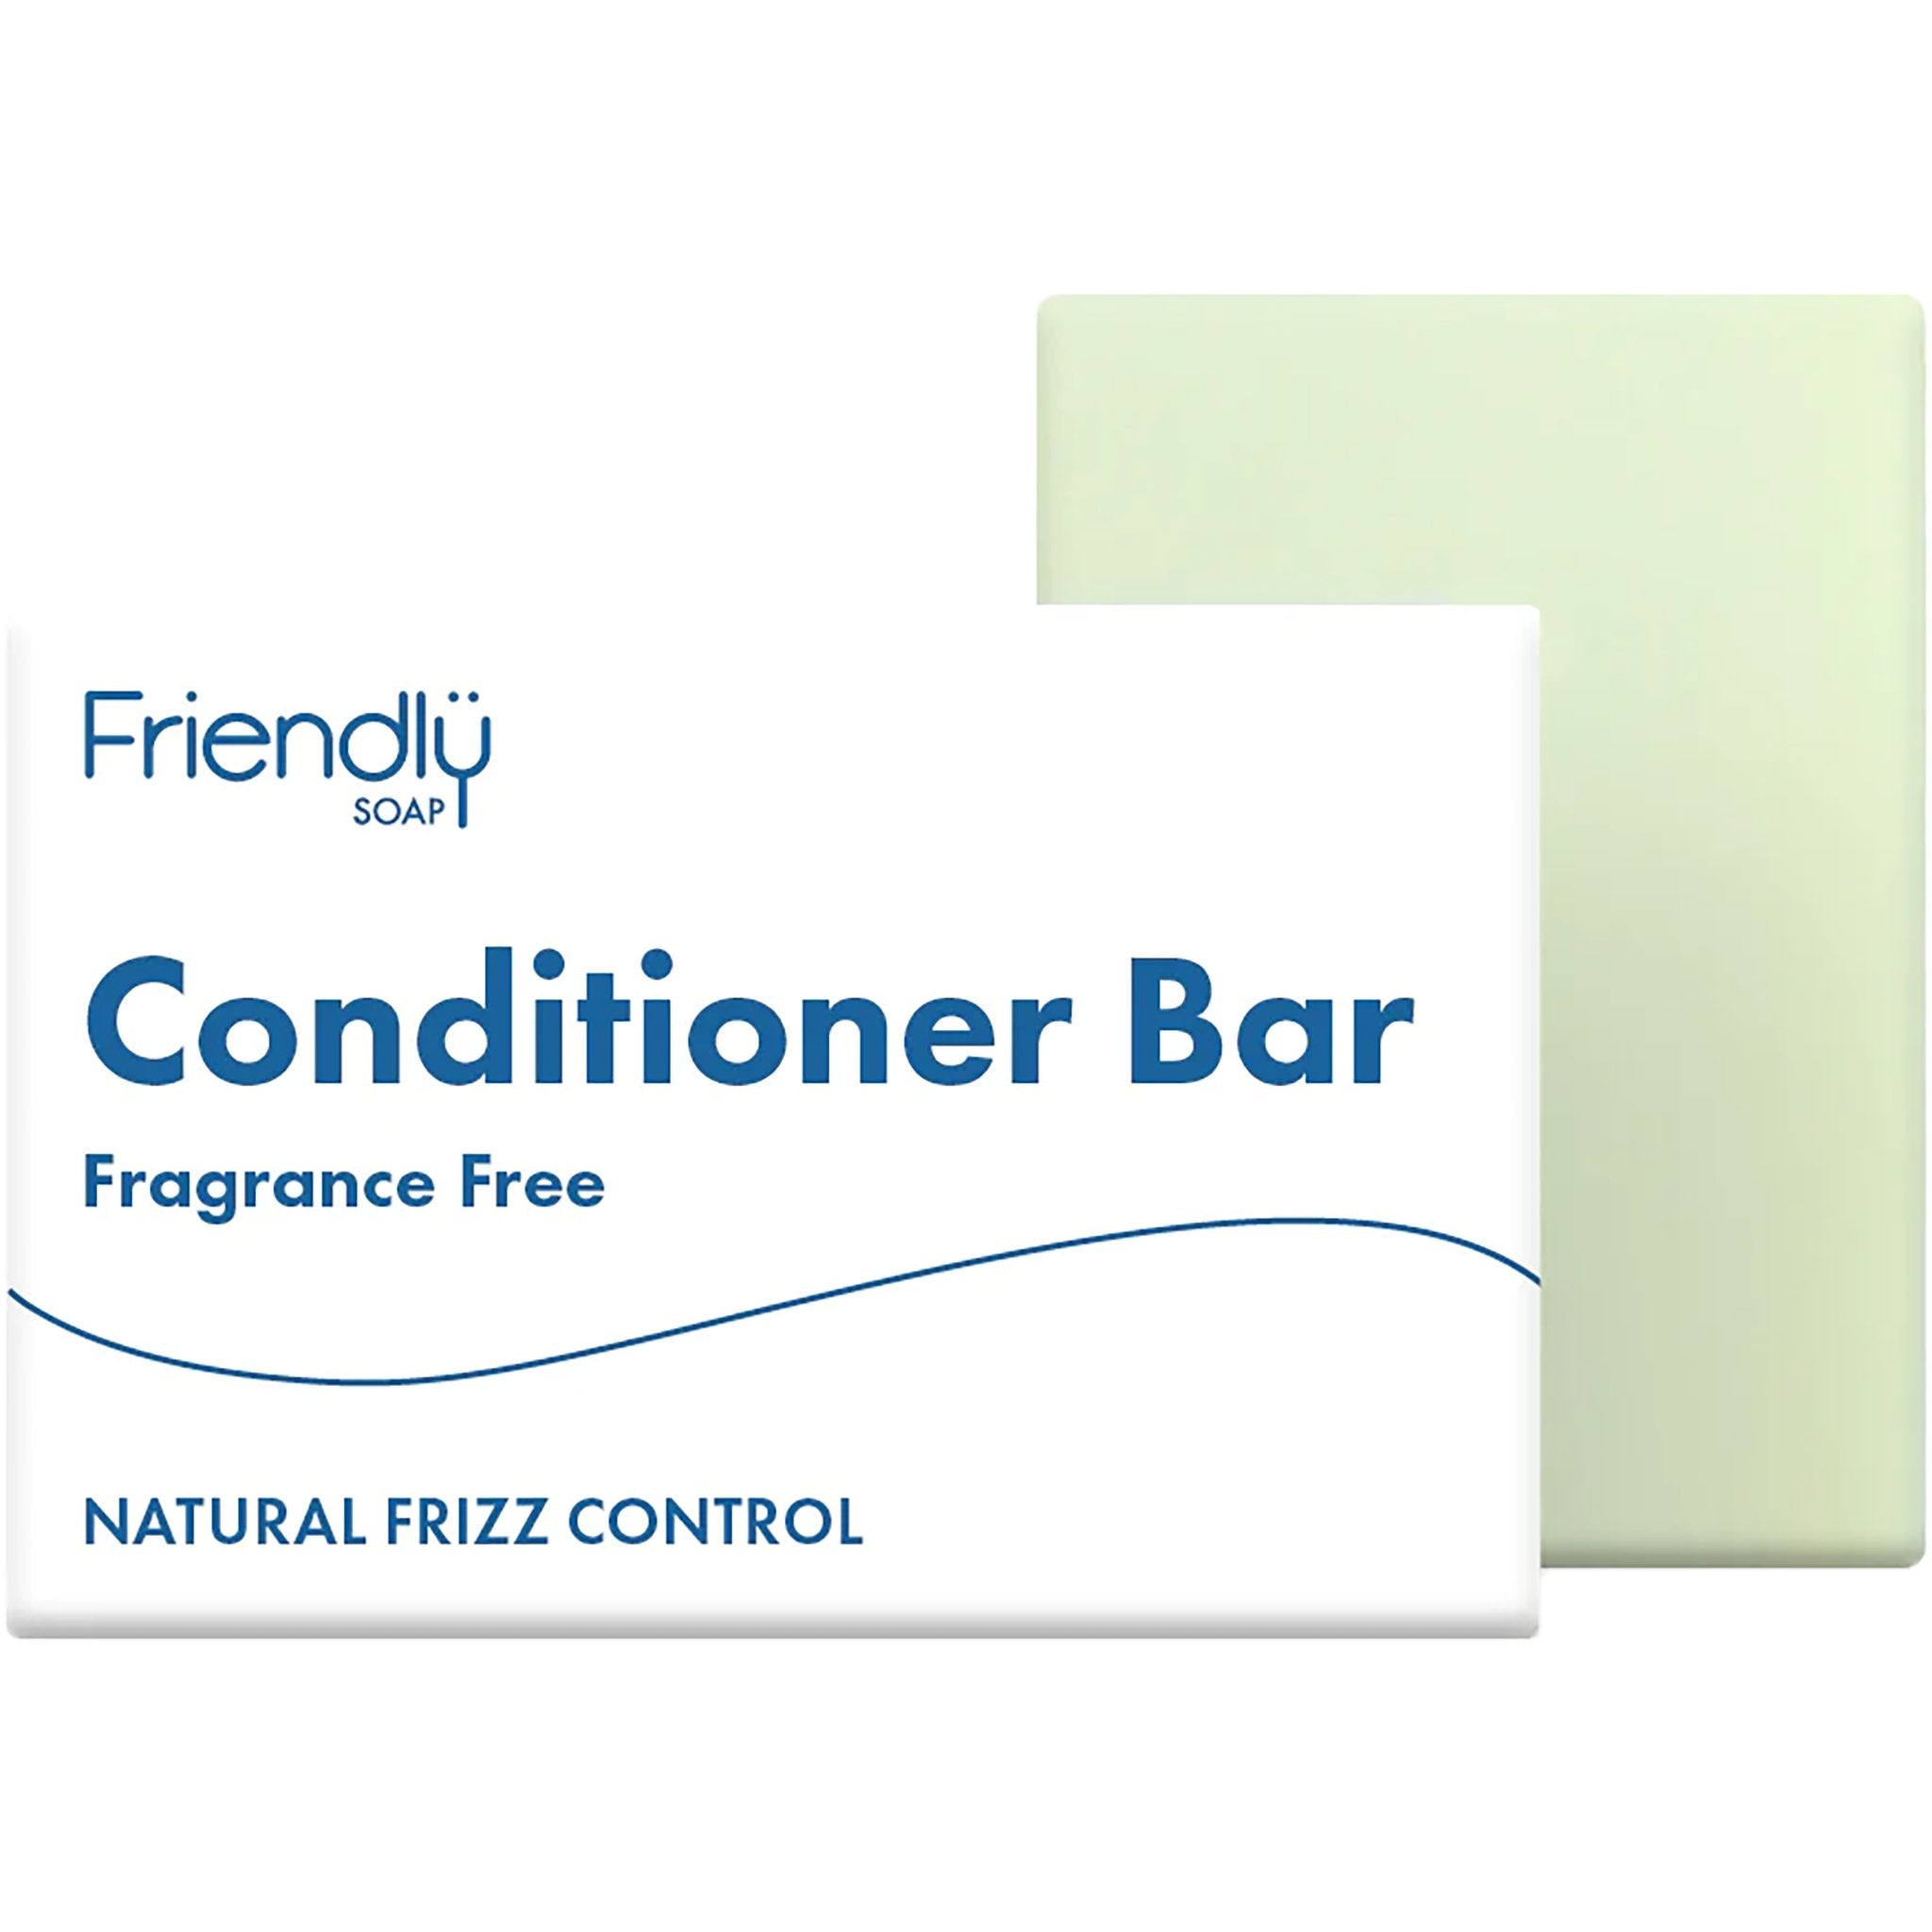 NEW Conditioner Bar - Fragrance Free - mypure.co.uk